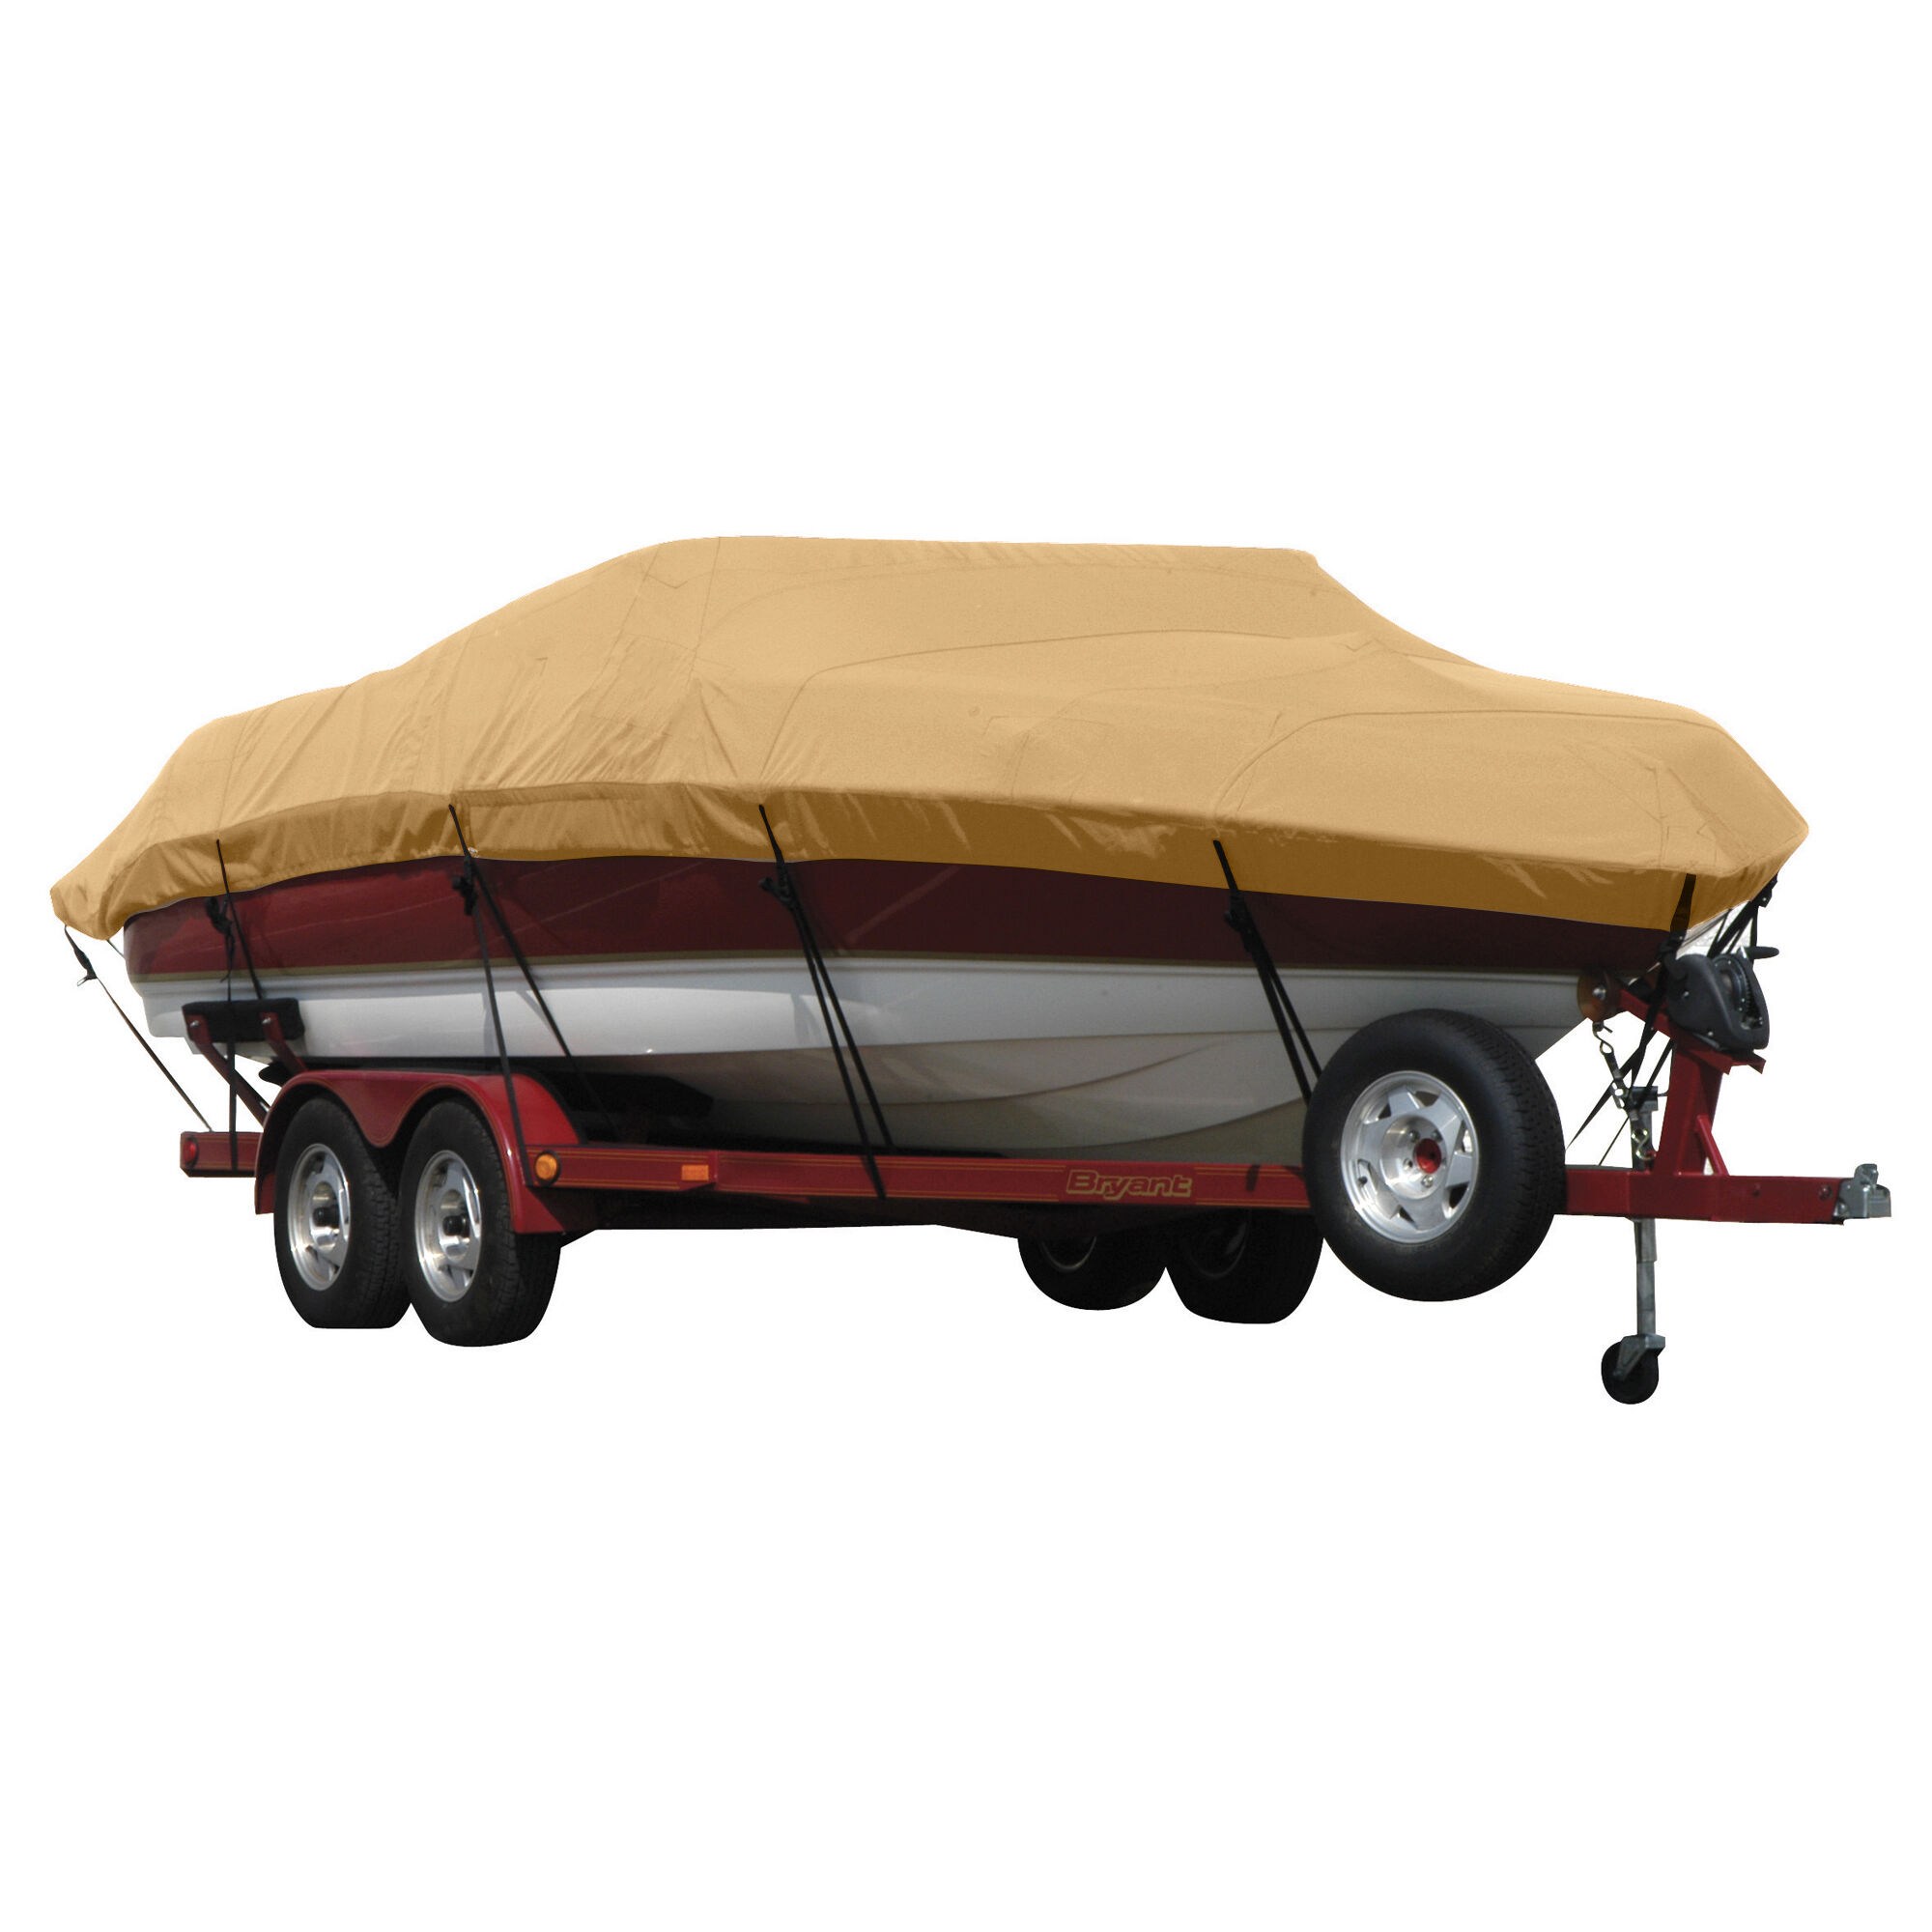 Covermate Exact Fit Sunbrella Boat Cover for Tracker Pro Guide V-16 Sc Pro Guide V-16 Single Console w/ Port Trolling Motor Seats Folded Down O/B.